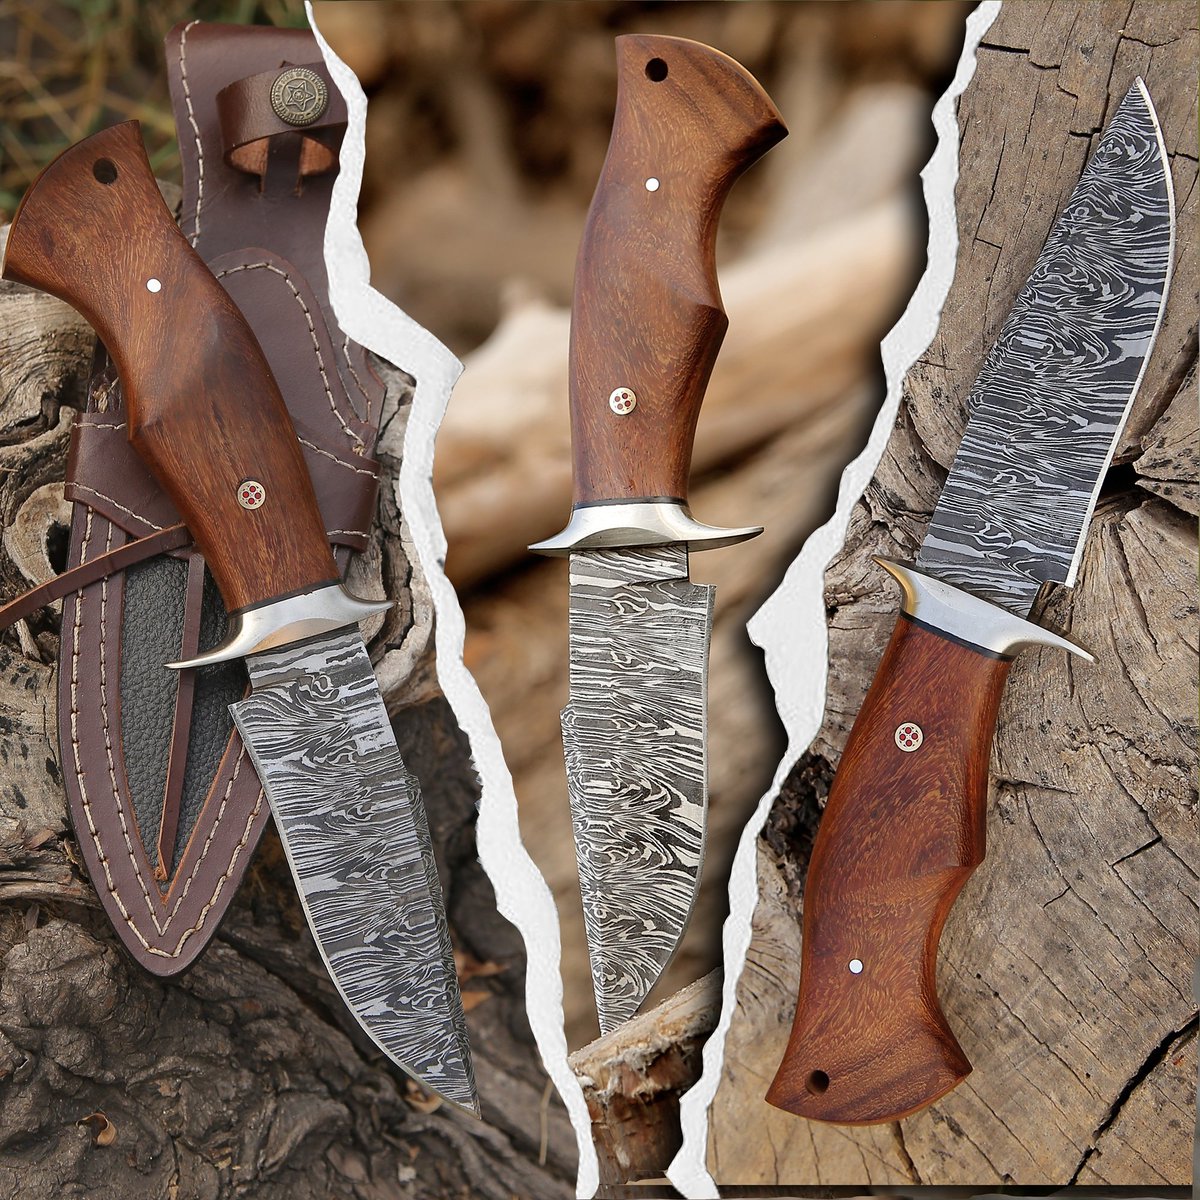 Ready to conquer the wild? Our Hunting Knife collection is built for adventure, offering durability and precision with every slice. 🏹🌲 #HuntingKnife #OutdoorAdventure #ExploreTheWild #knife #knifeporn #knifecommunity #knifenut #knifestagram #knifemaking #knifepics #knifesale